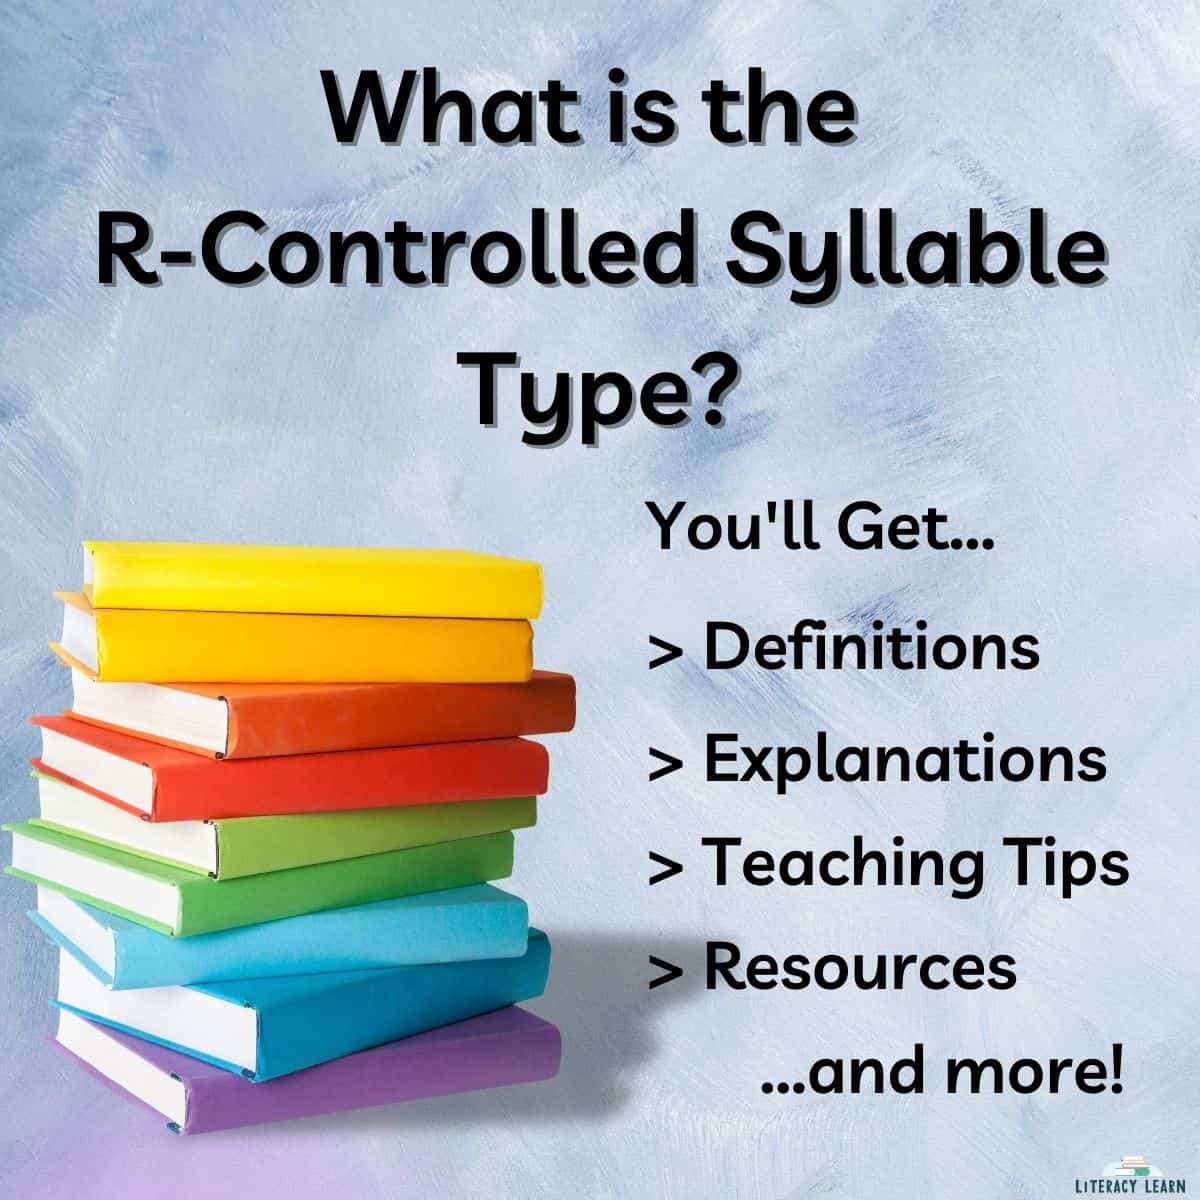 Blue background with a pile of books and title "What is the R-Controlled Syllable Type?"